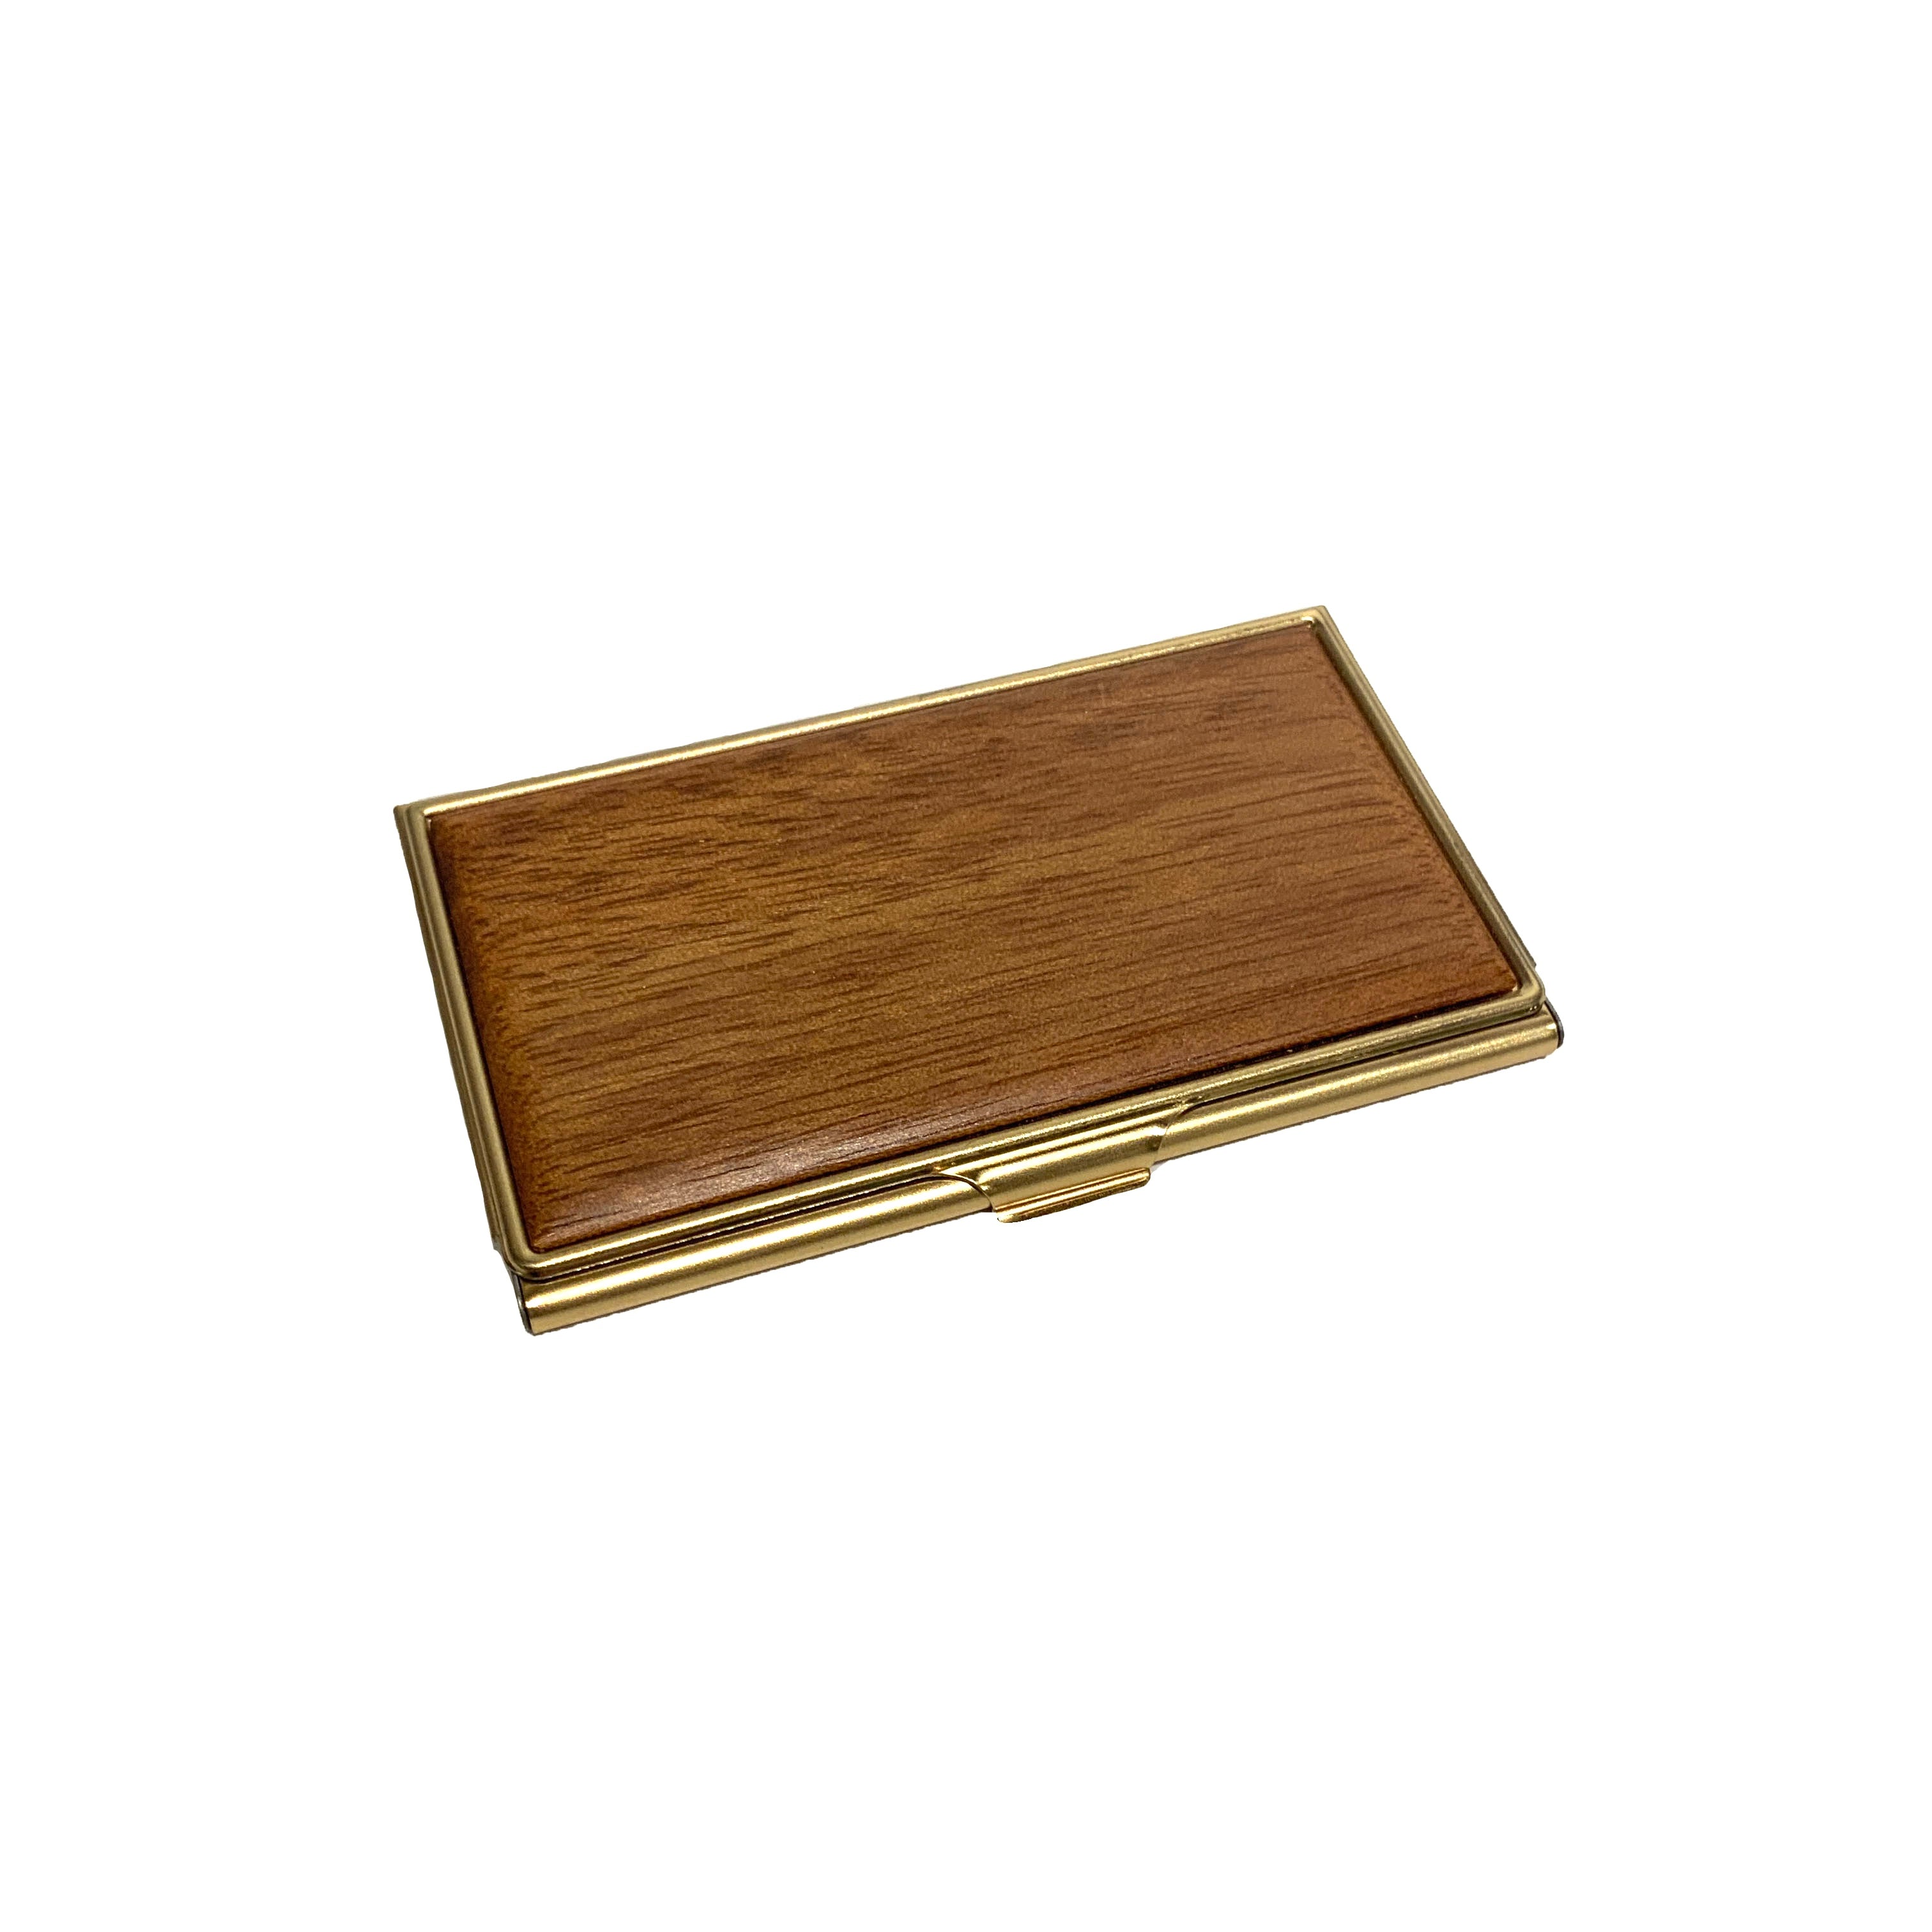 BUSINESS CARD CASE